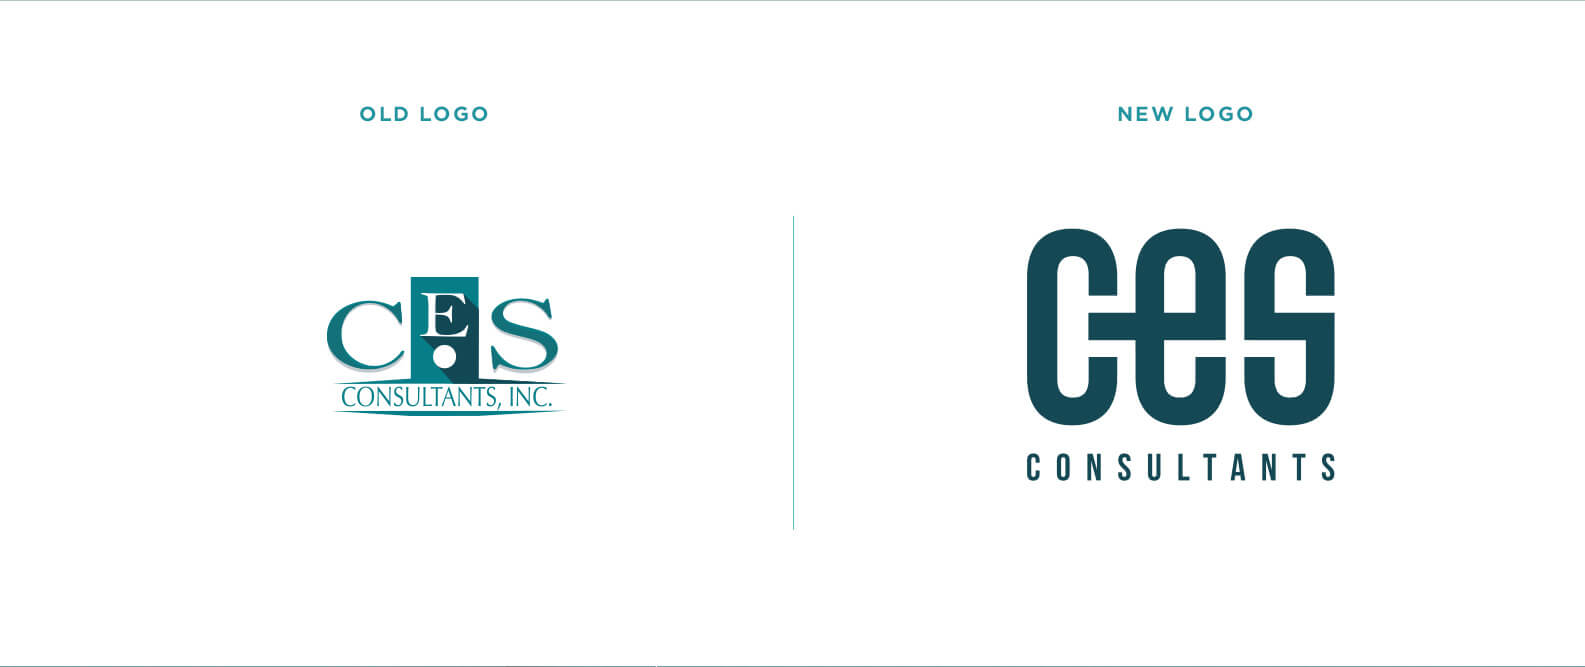 CES Consulting rebranded logo by Jacober Creative